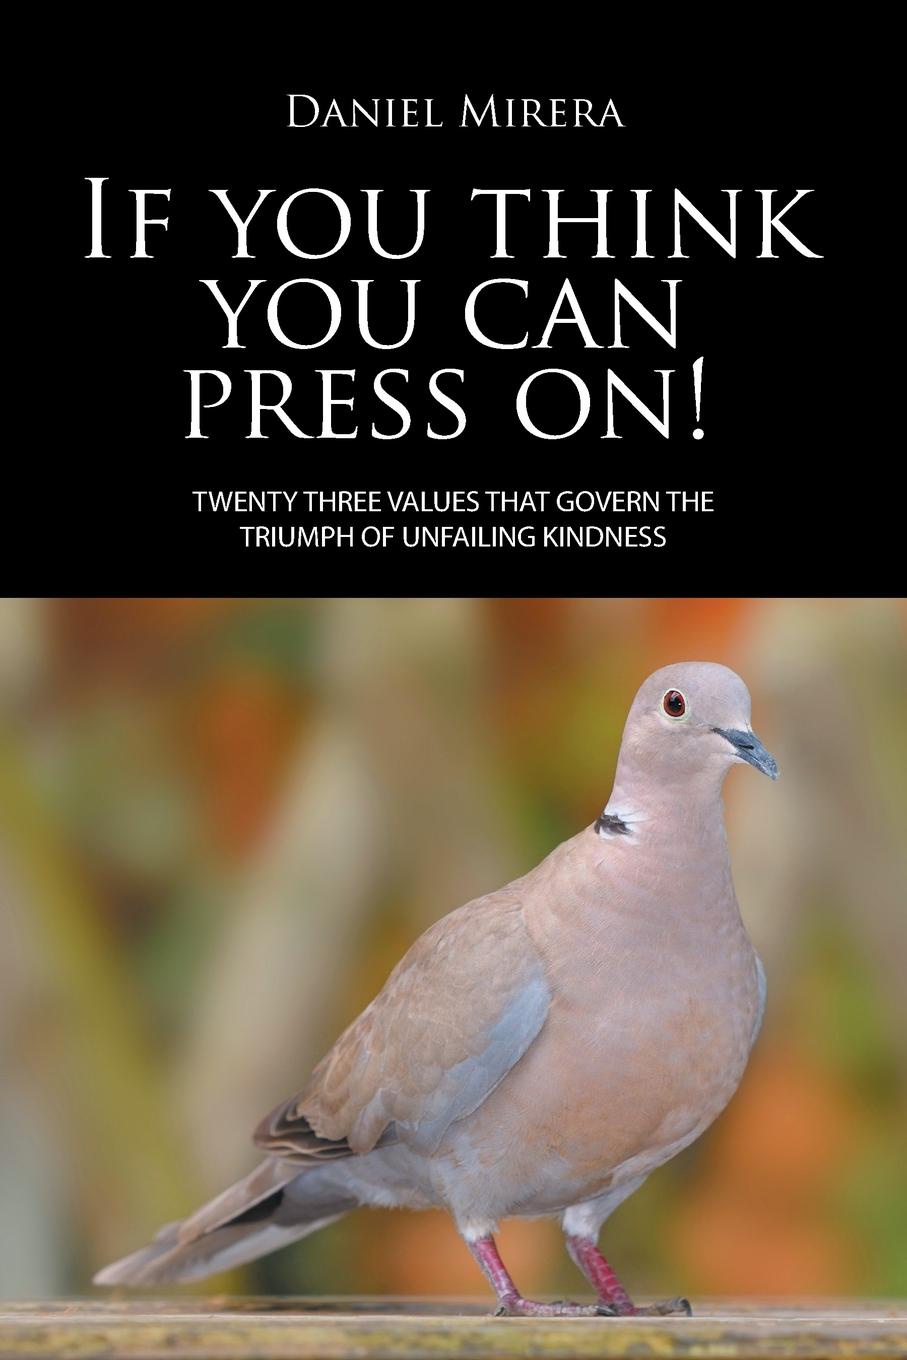 If you think you can press on!. TWENTY THREE VALUES THAT GOVERN THE TRIUMPH OF UNFAILING KINDNESS